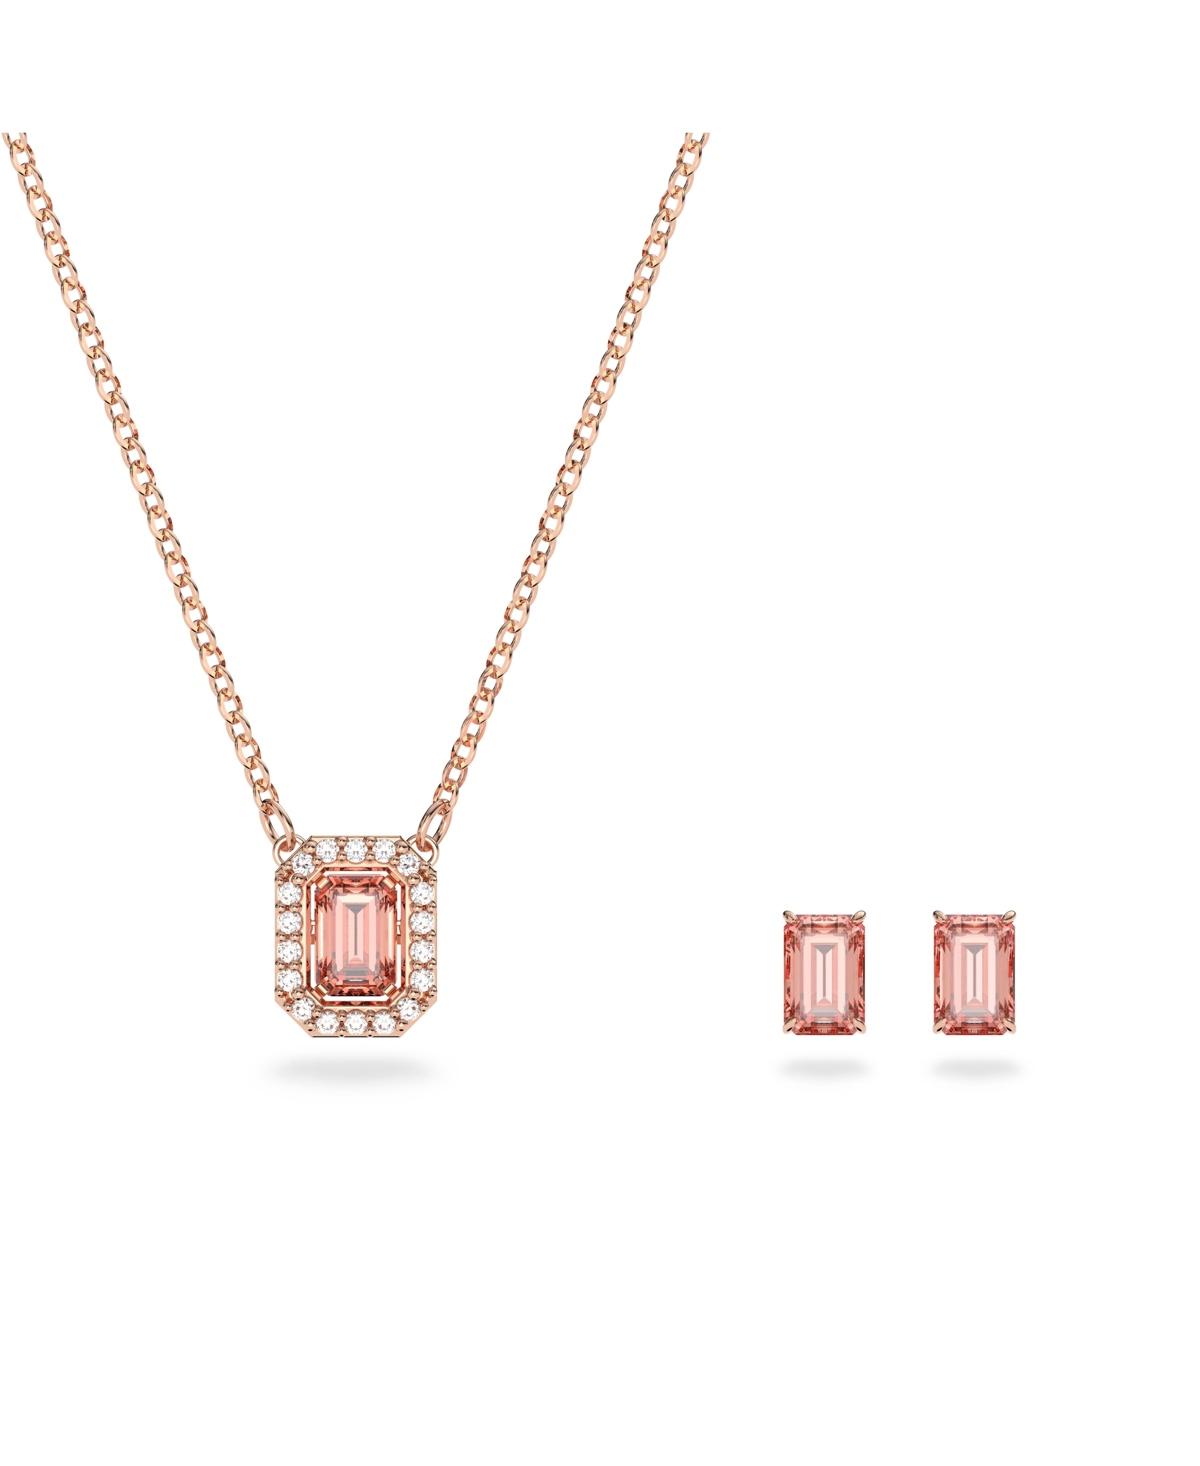 Swarovski Millenia Octagon Cut  Zirconia Necklace And Earring Set, 2 Pieces In Pink